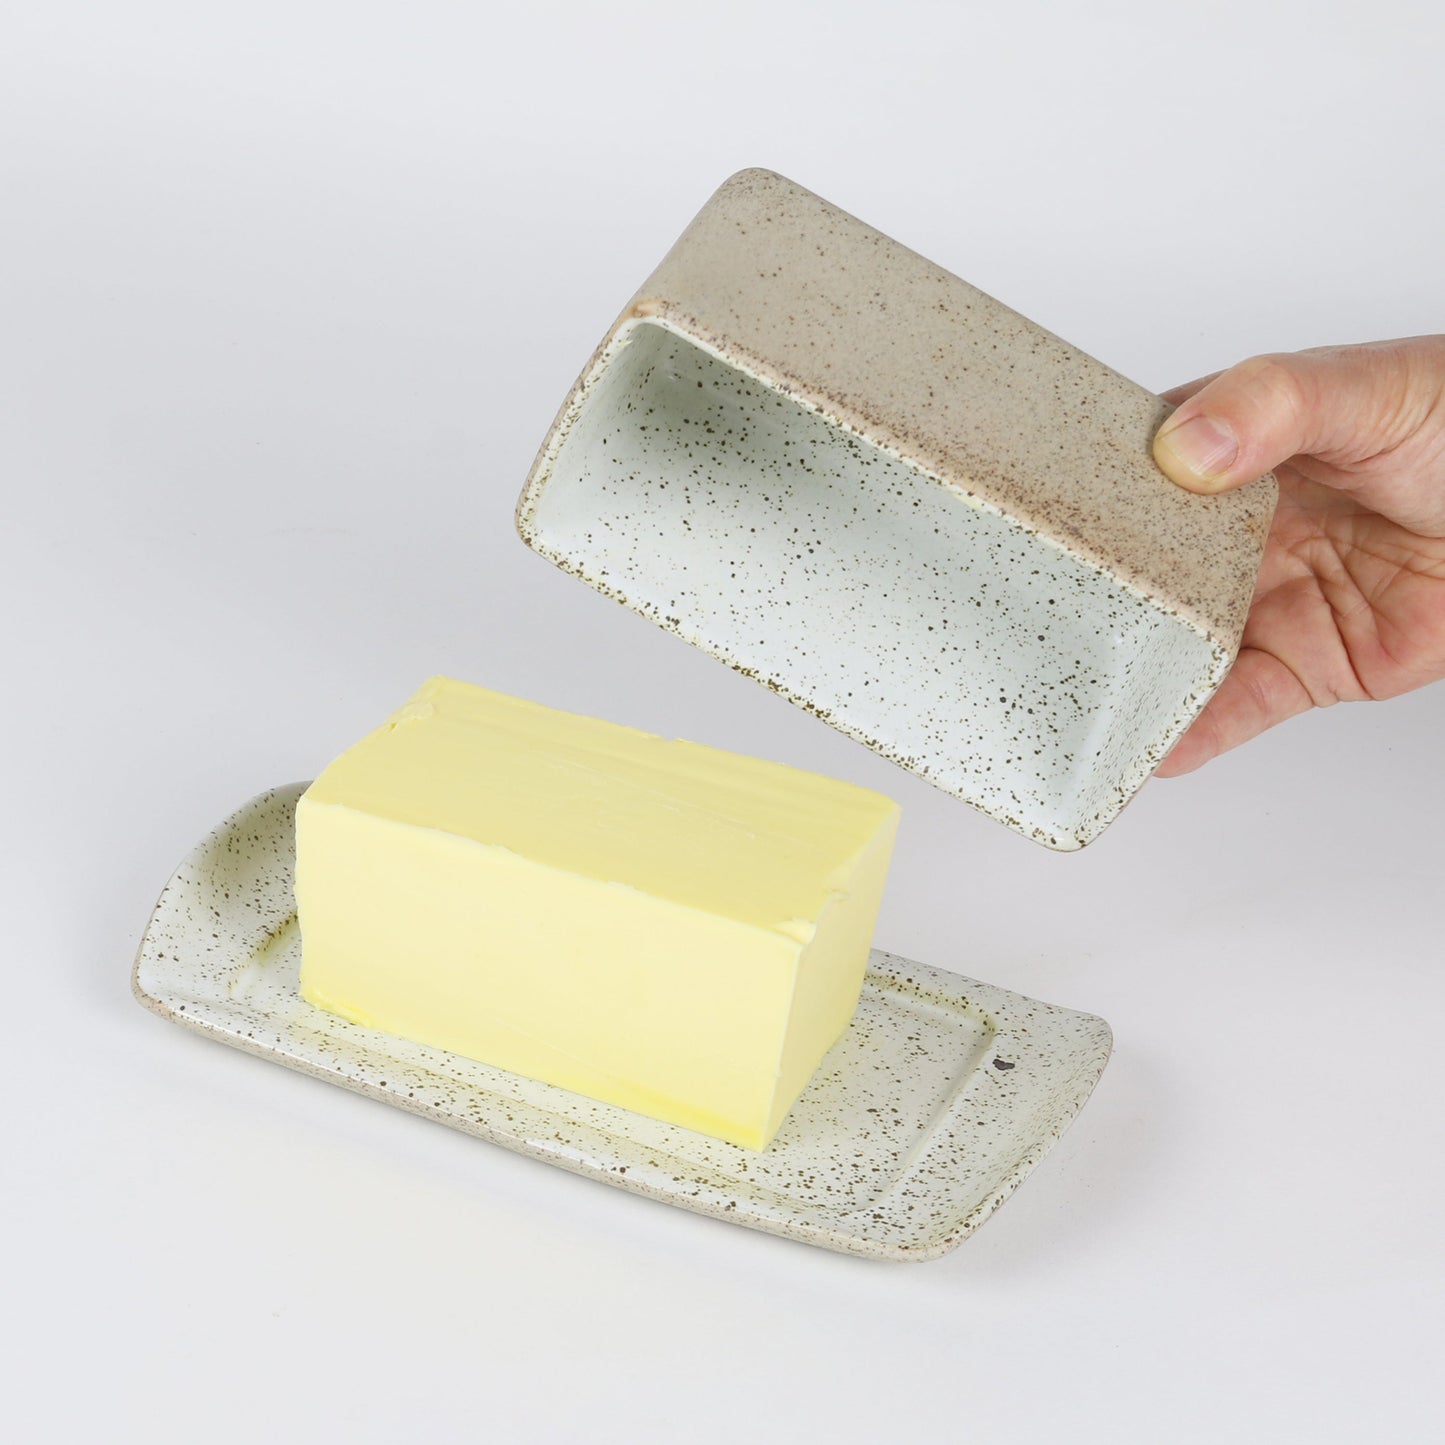 Butter Dish - Garden to table